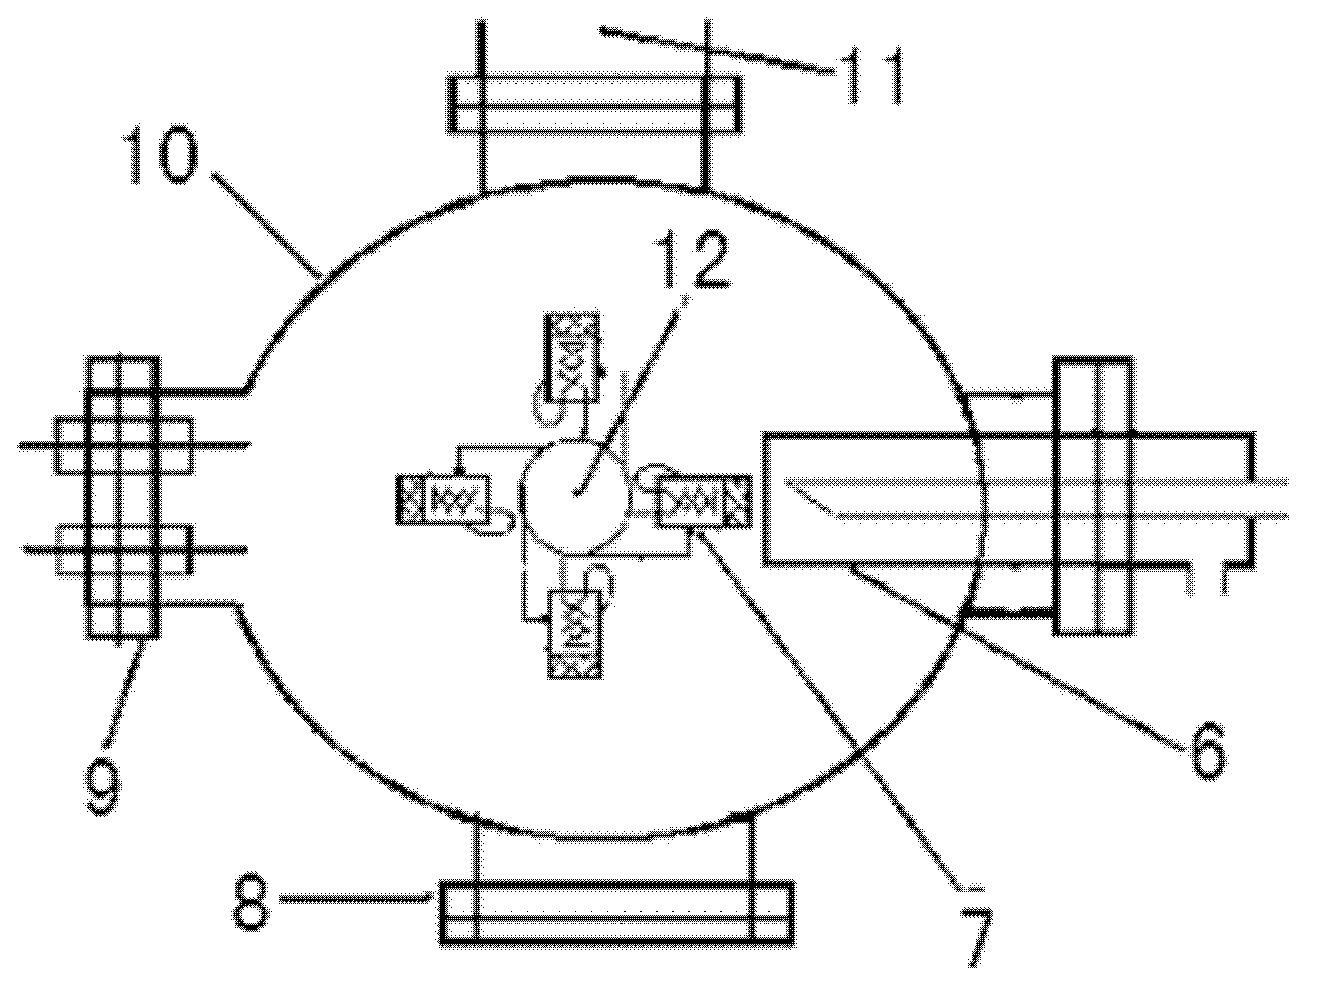 Cathode emission testing apparatus and system for microwave vacuum electronic devices